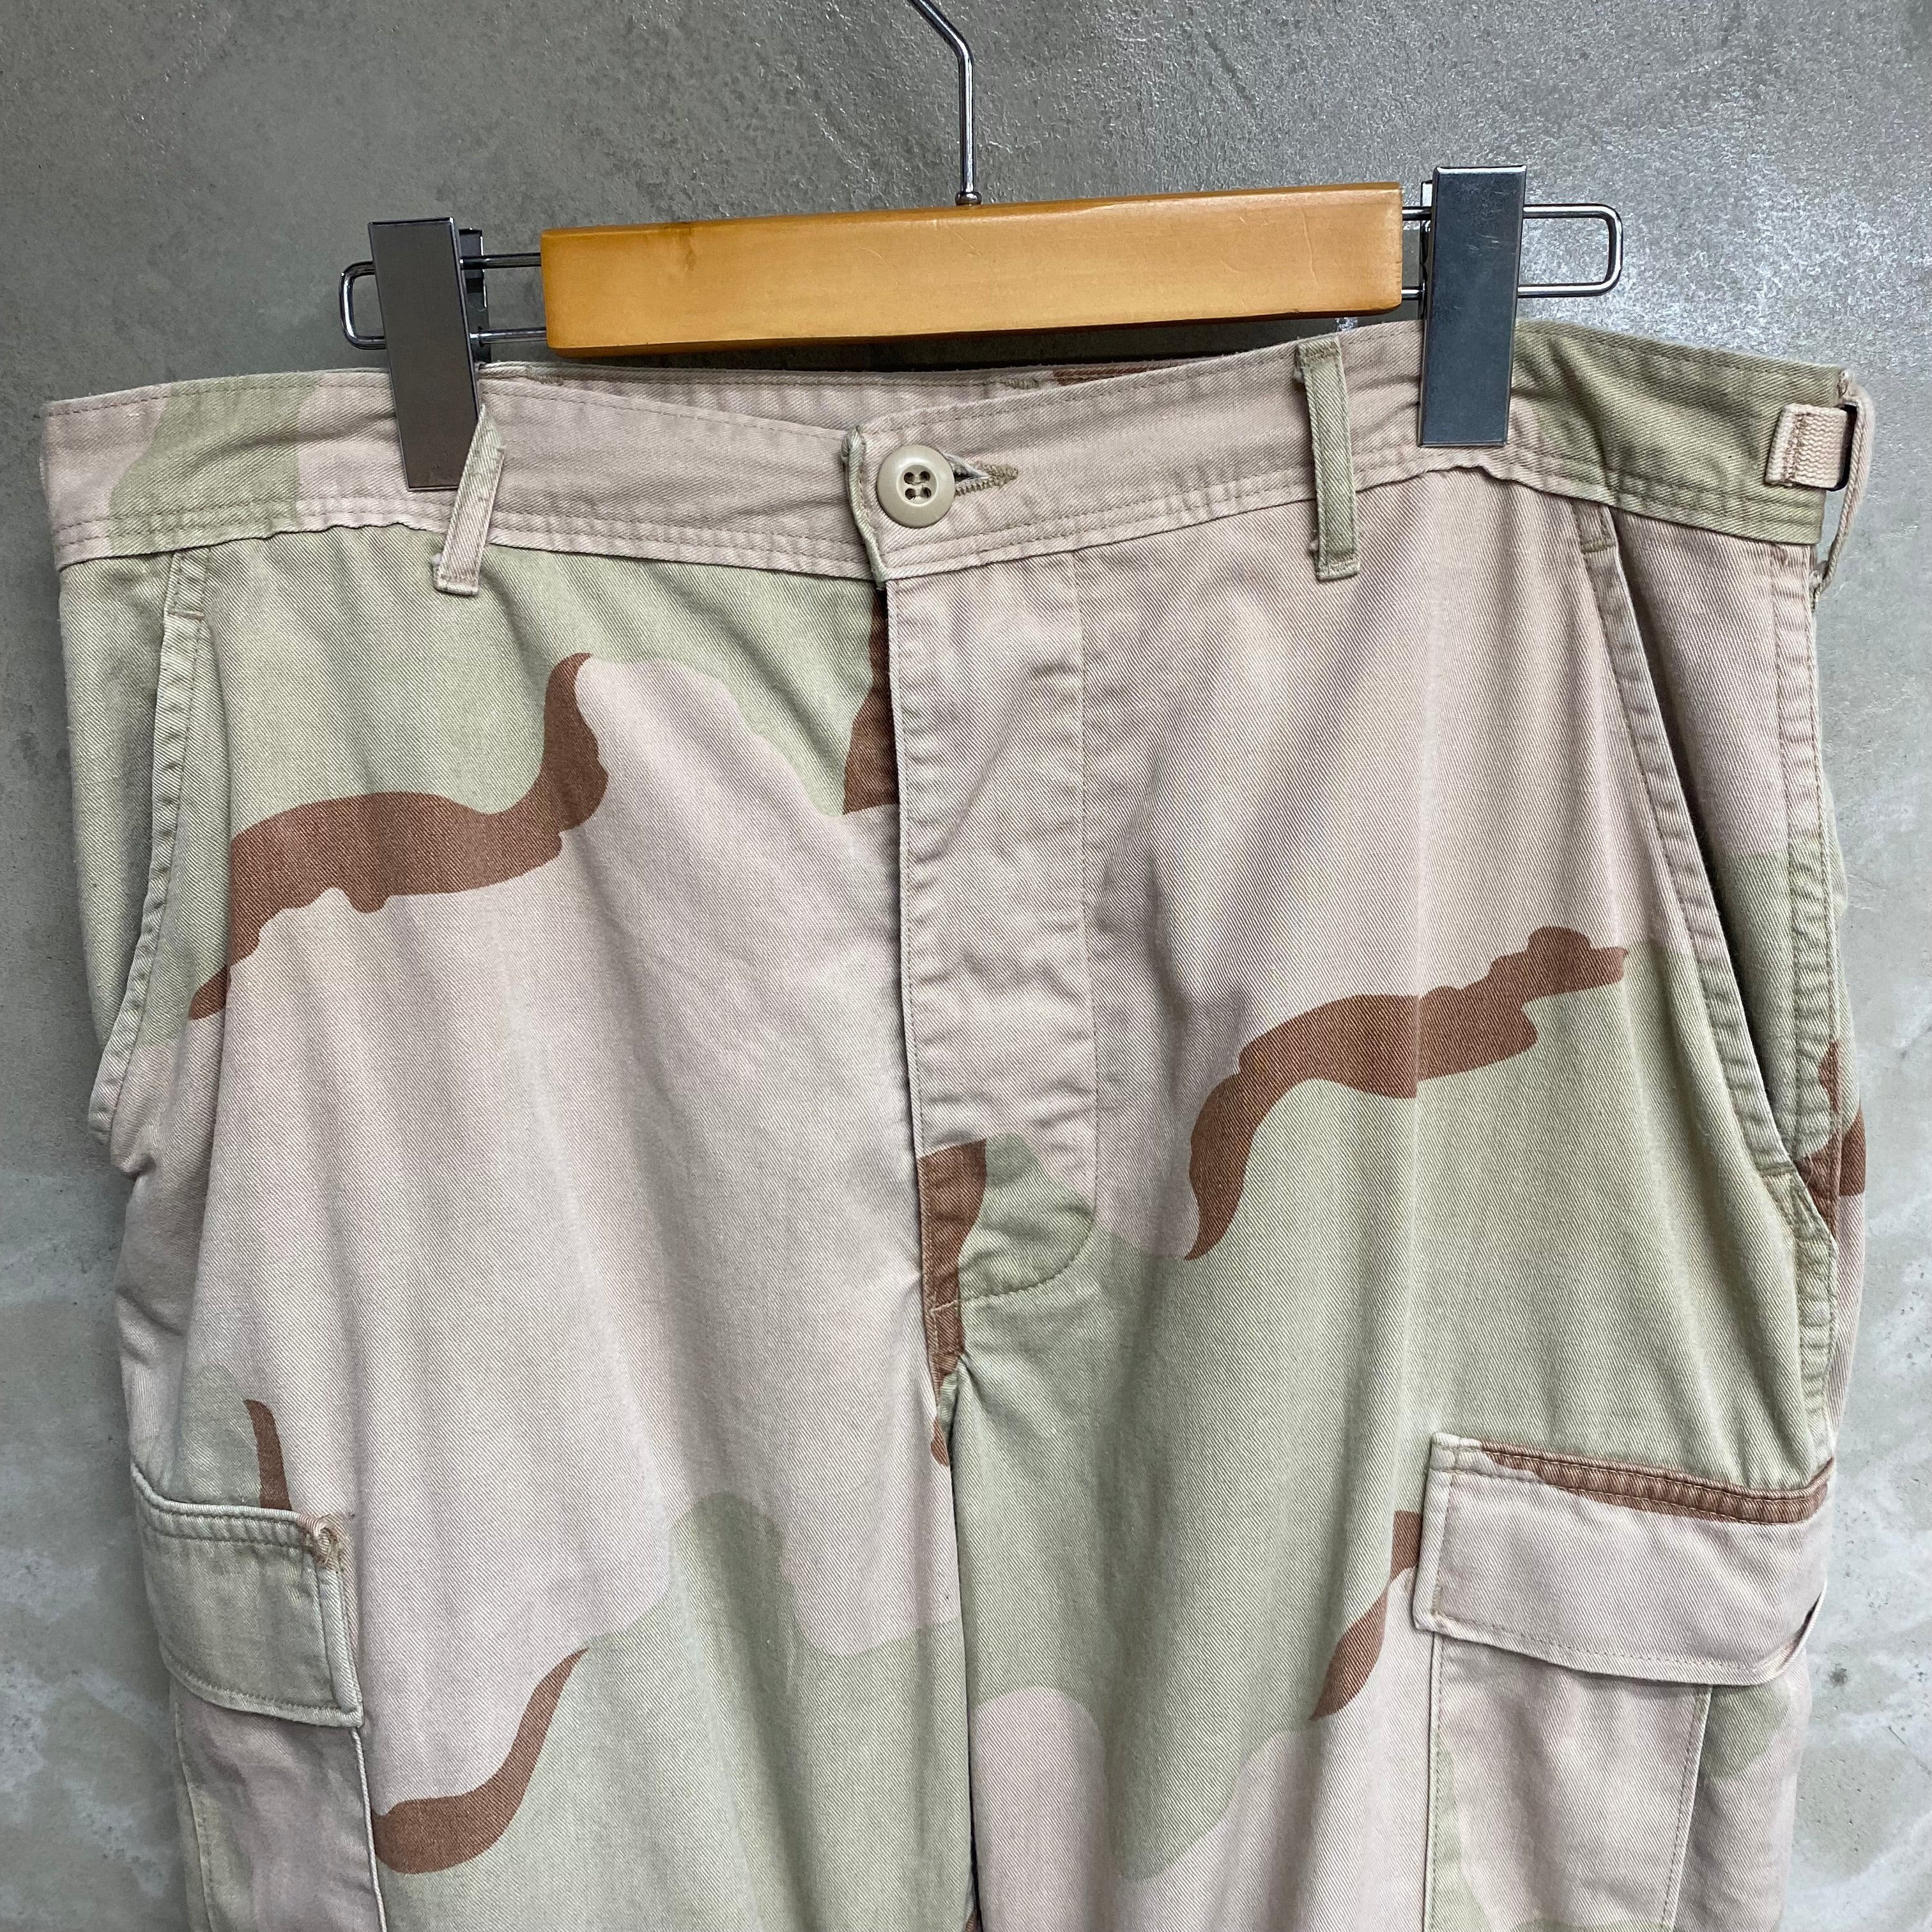 [ ONLY ONE ! ] US ARMY DCU TROUSERS / US MILITARY